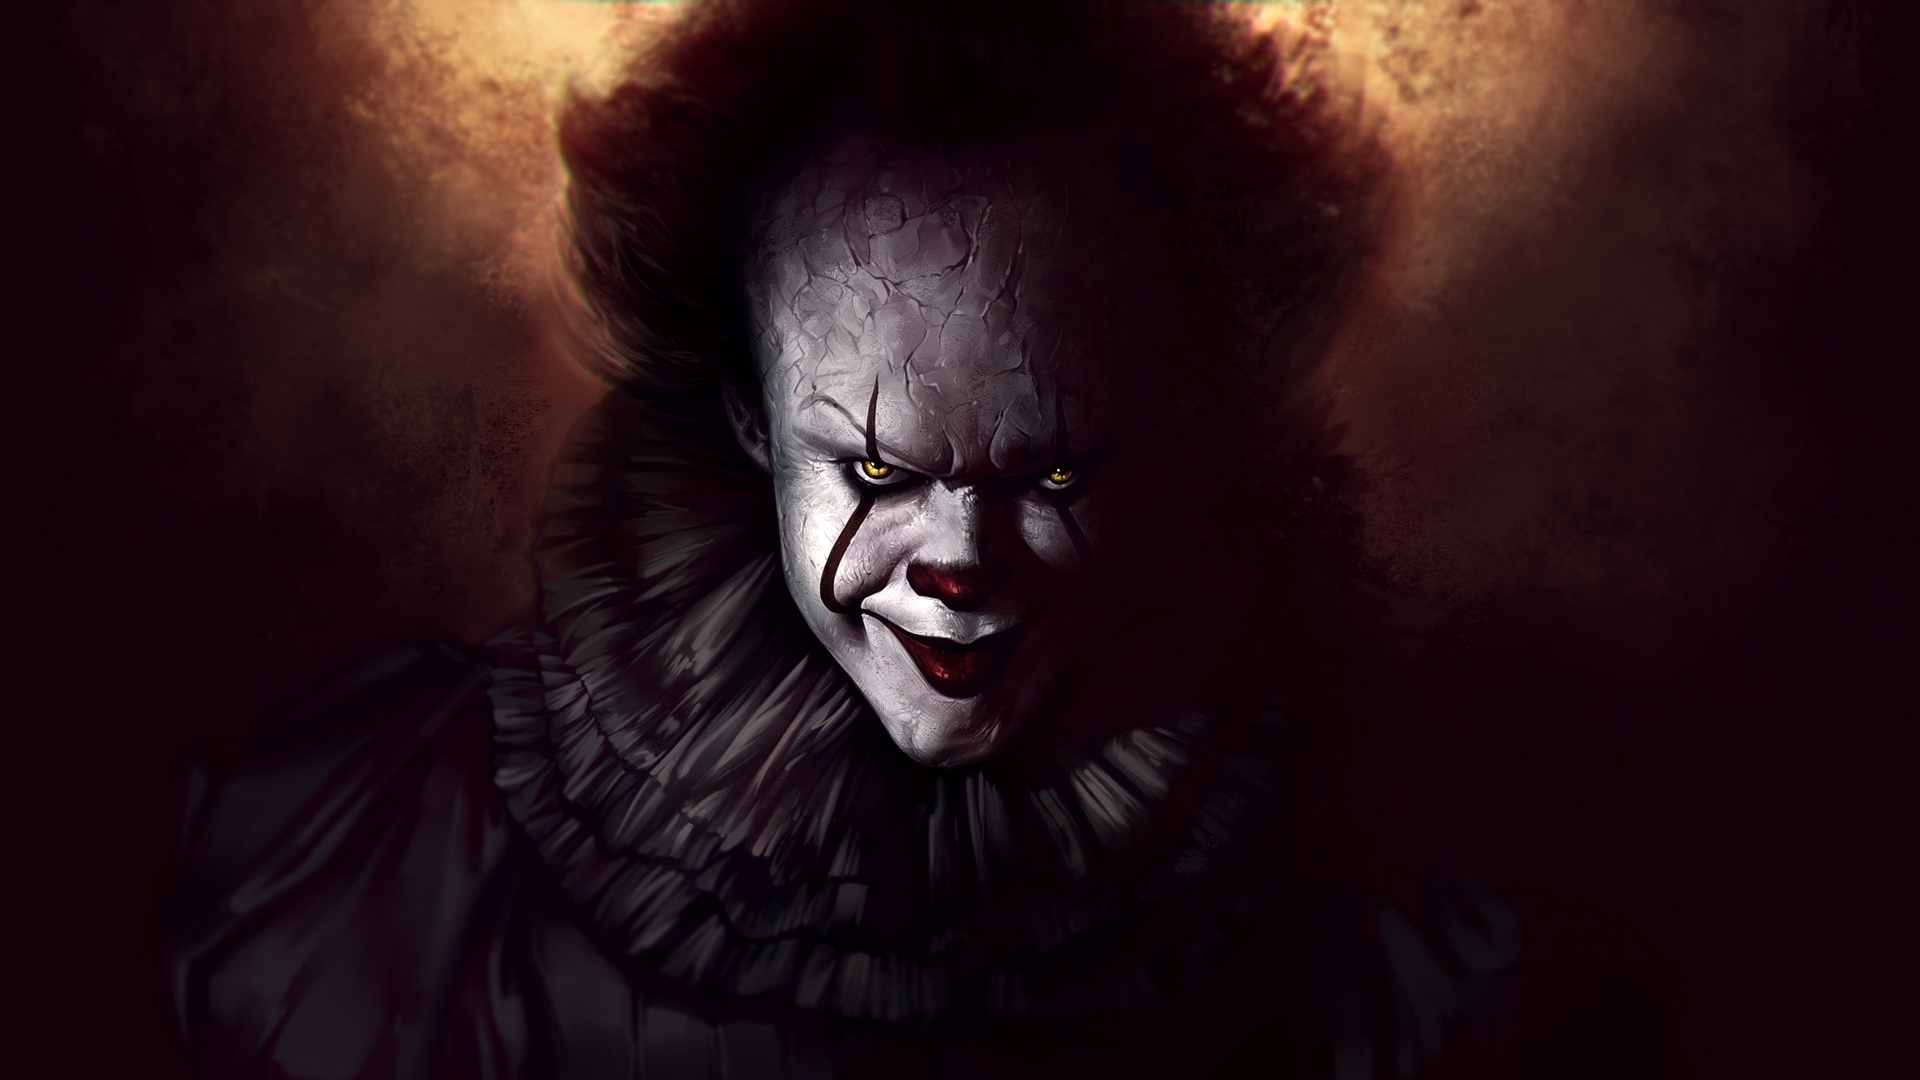 Free photo Pennywise the evil clown and the darkness.